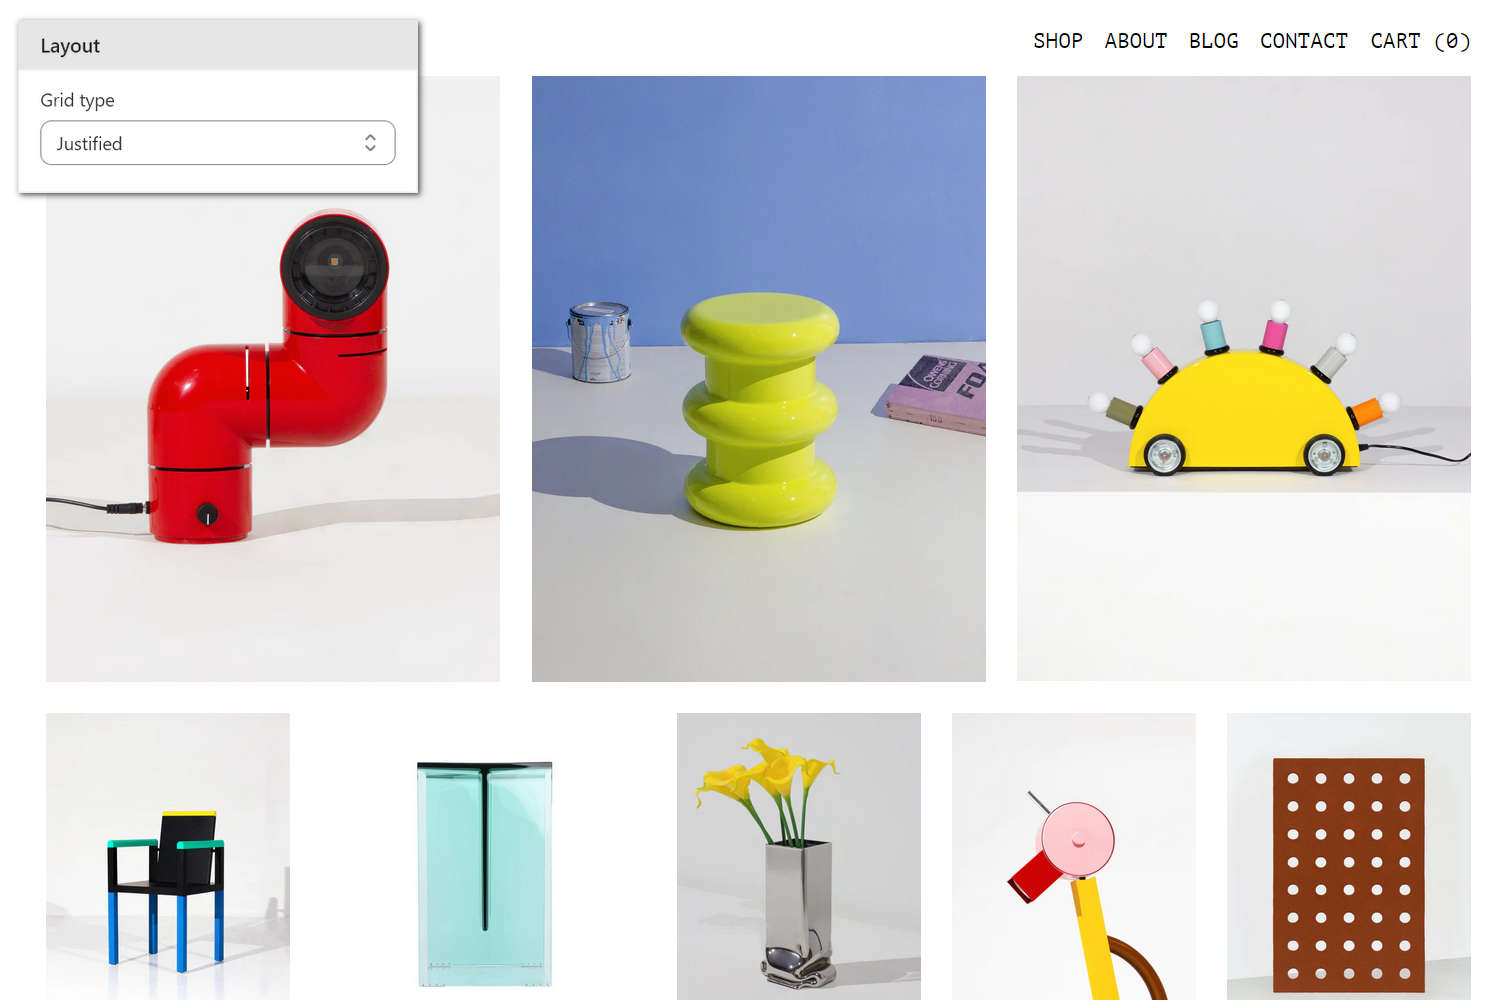 An example Image gallery section on a store's Homepage.